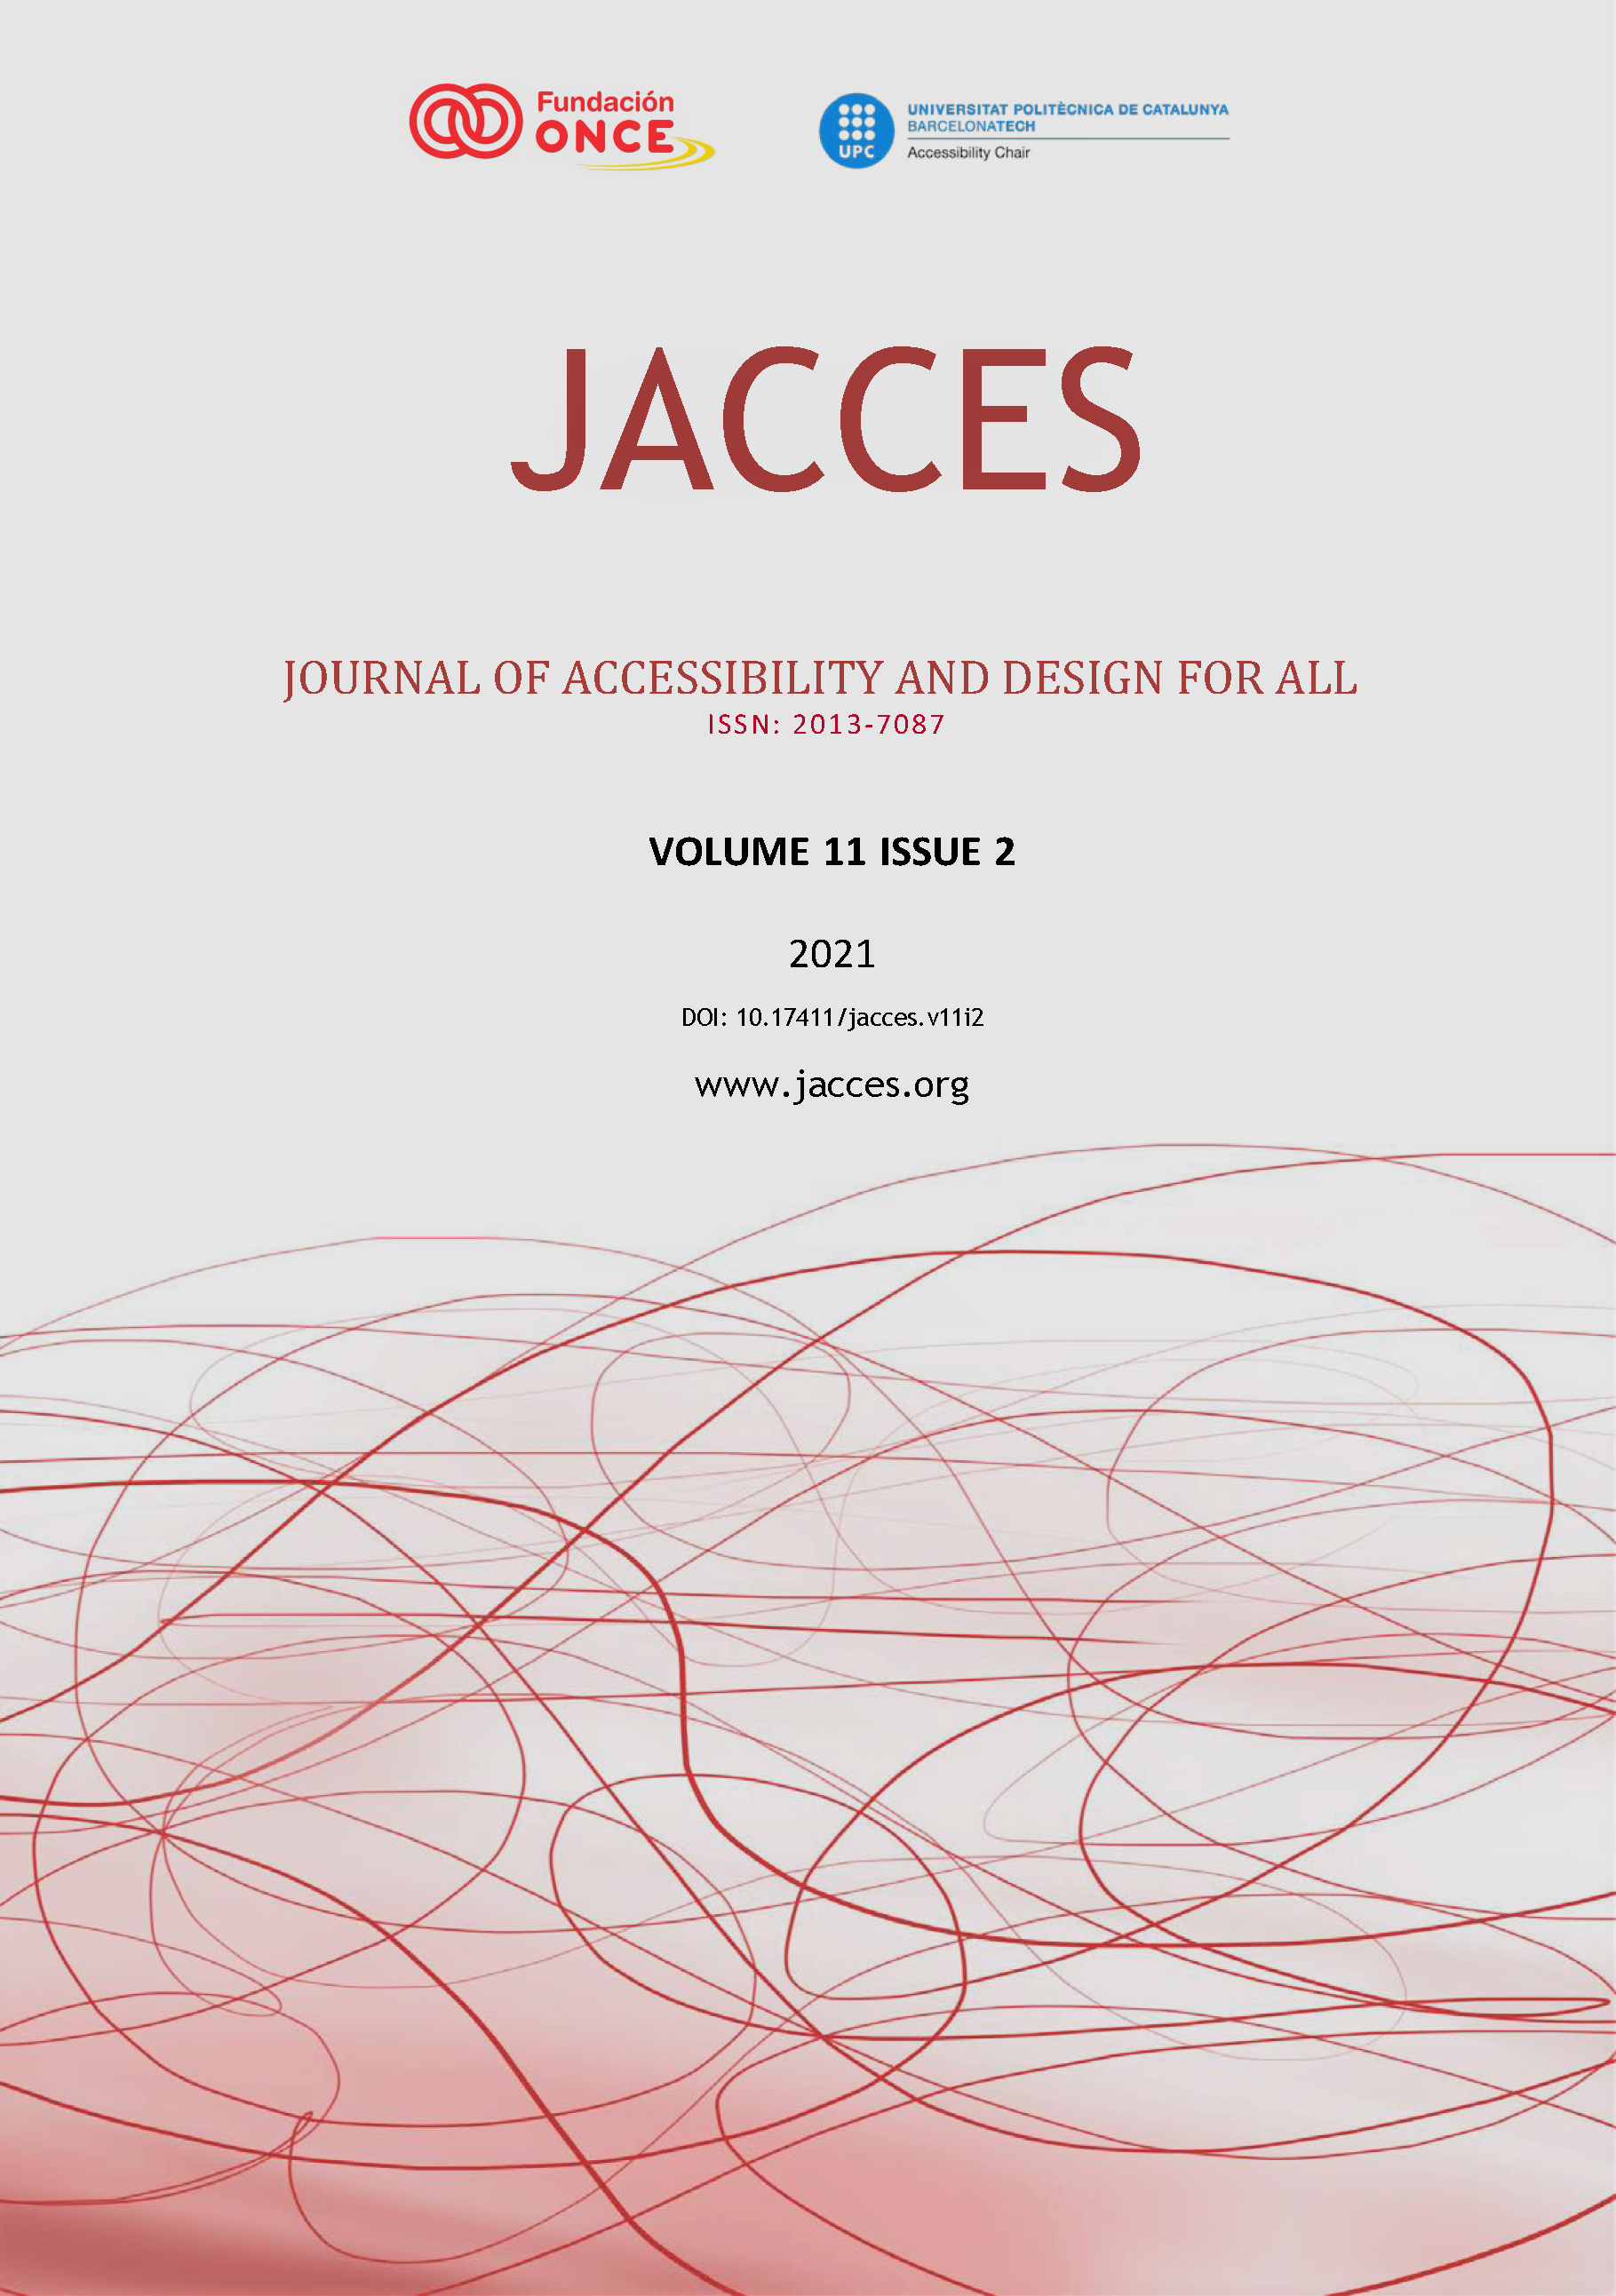 Cover of Journal of Accessibility and Design for All Vol. 11 No. 2 (2021)